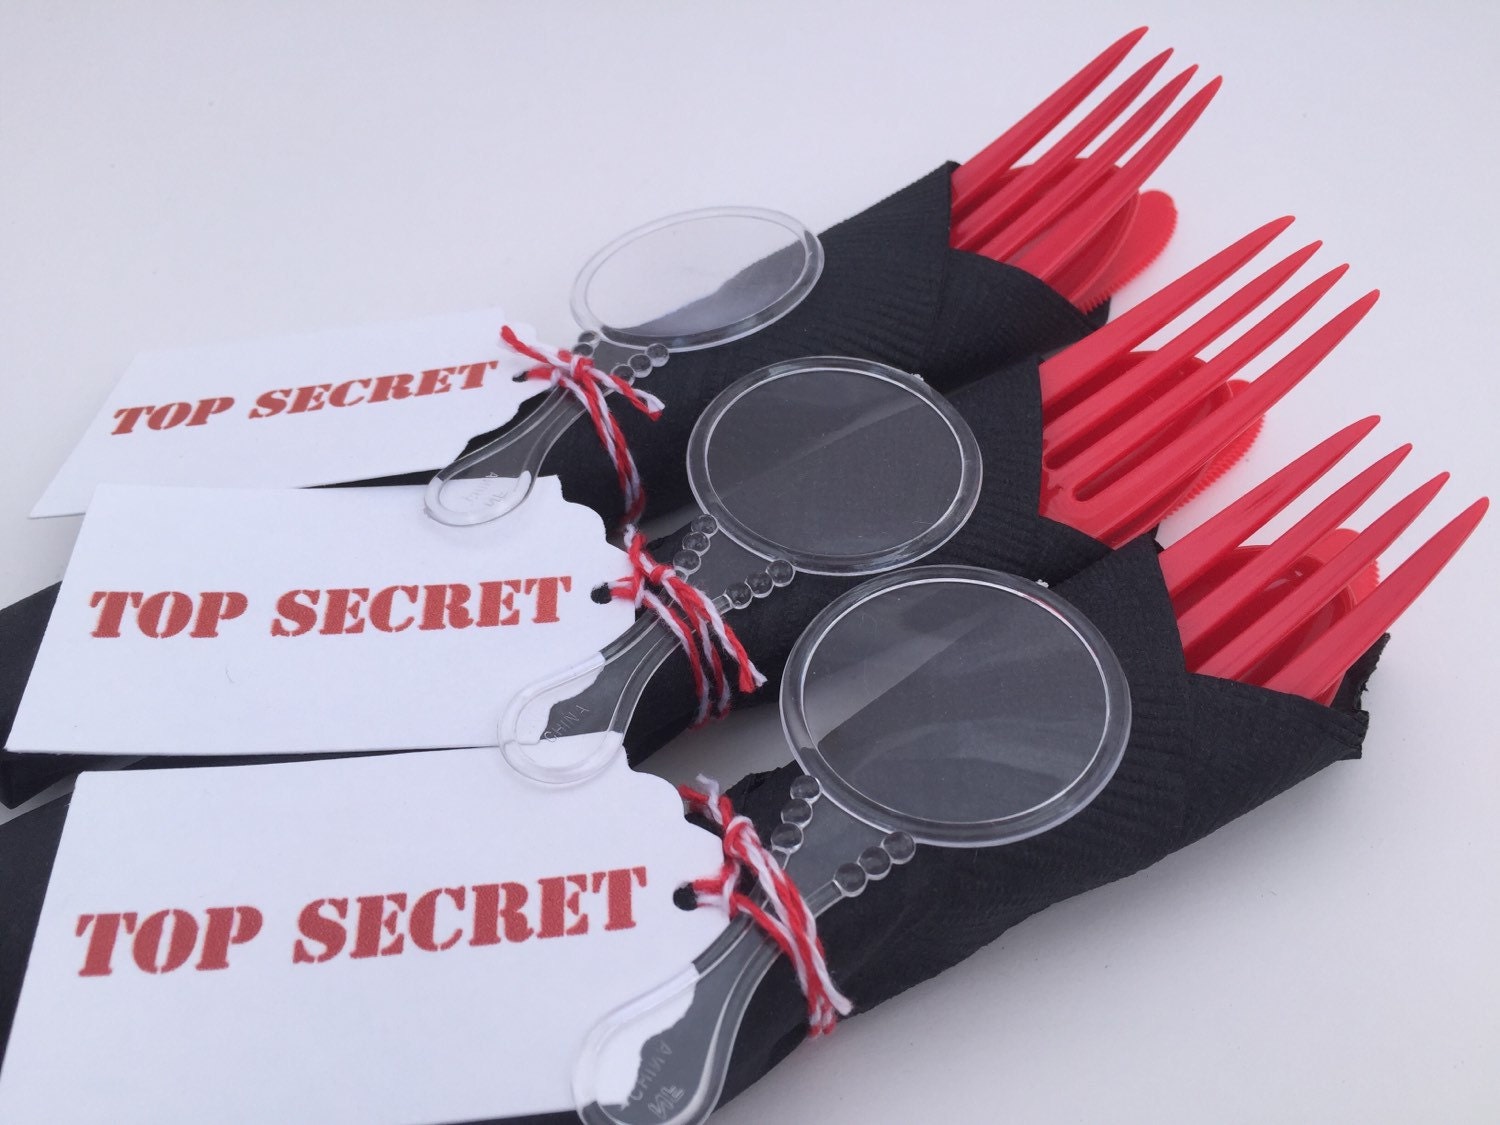 spy party ideas for adults